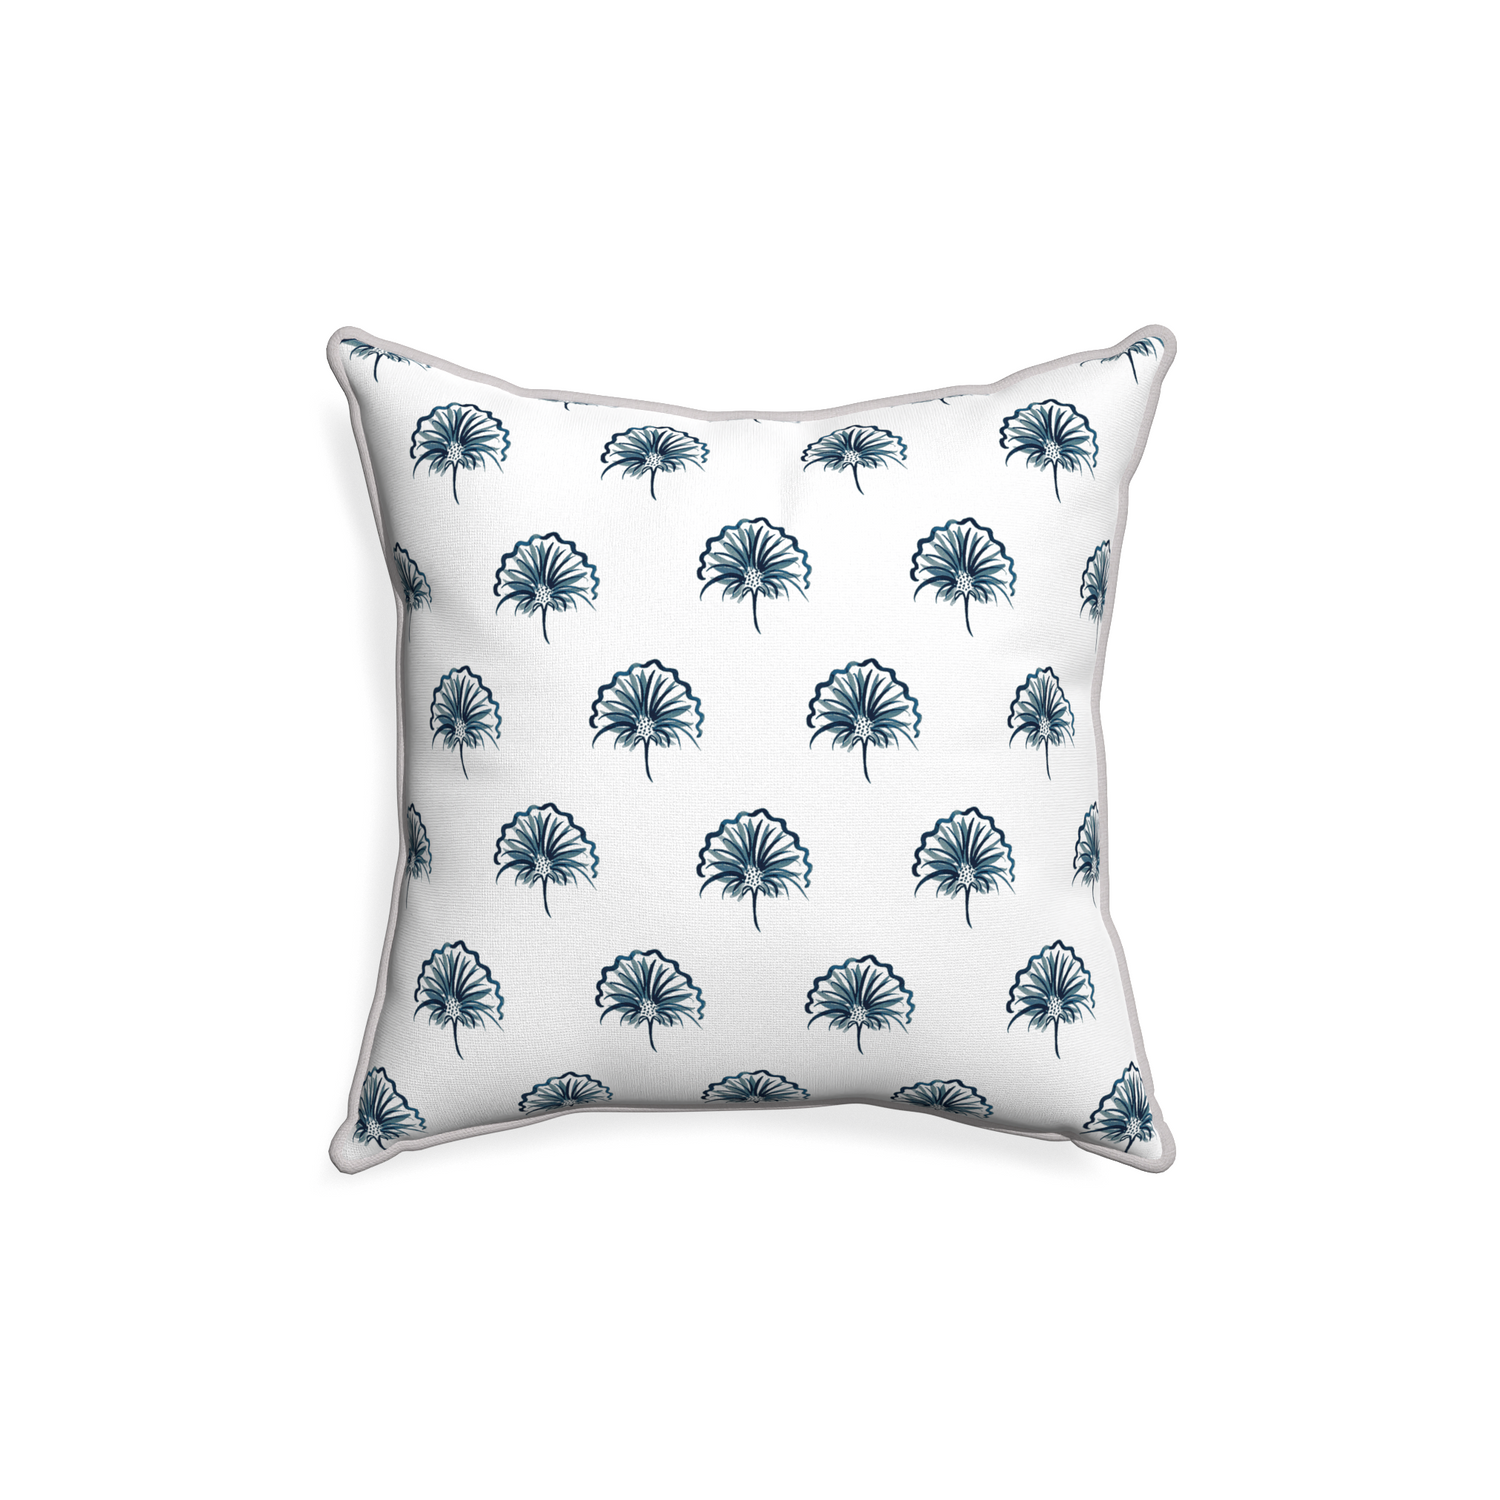 18-square penelope midnight custom floral navypillow with pebble piping on white background